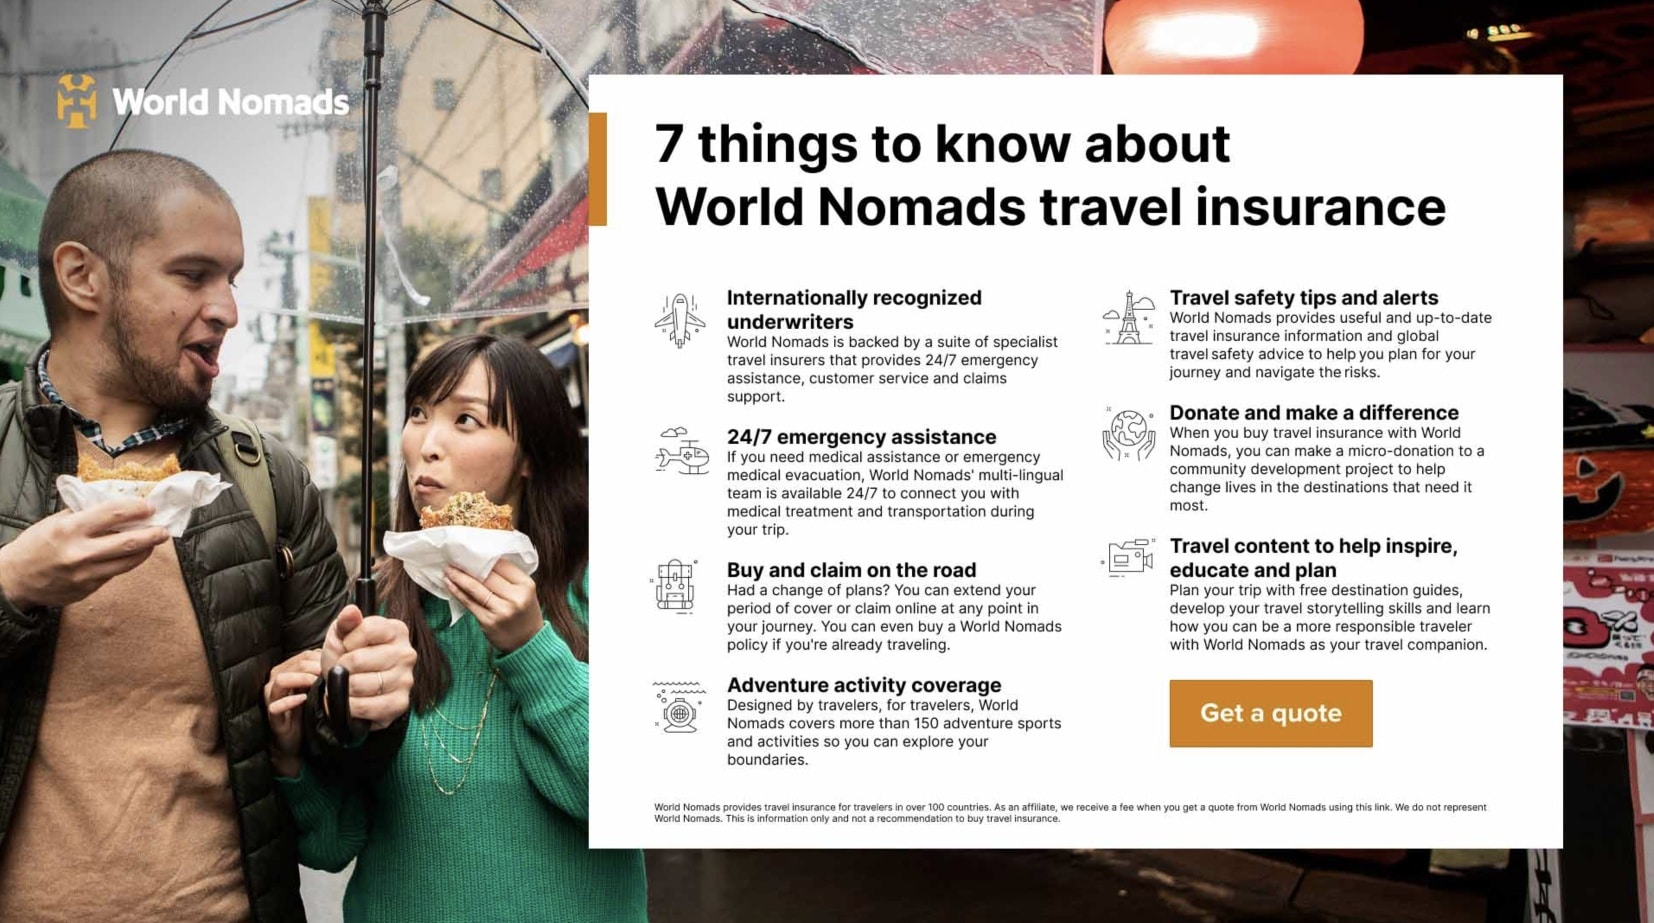 7 things to know about World Nomads travel insurance